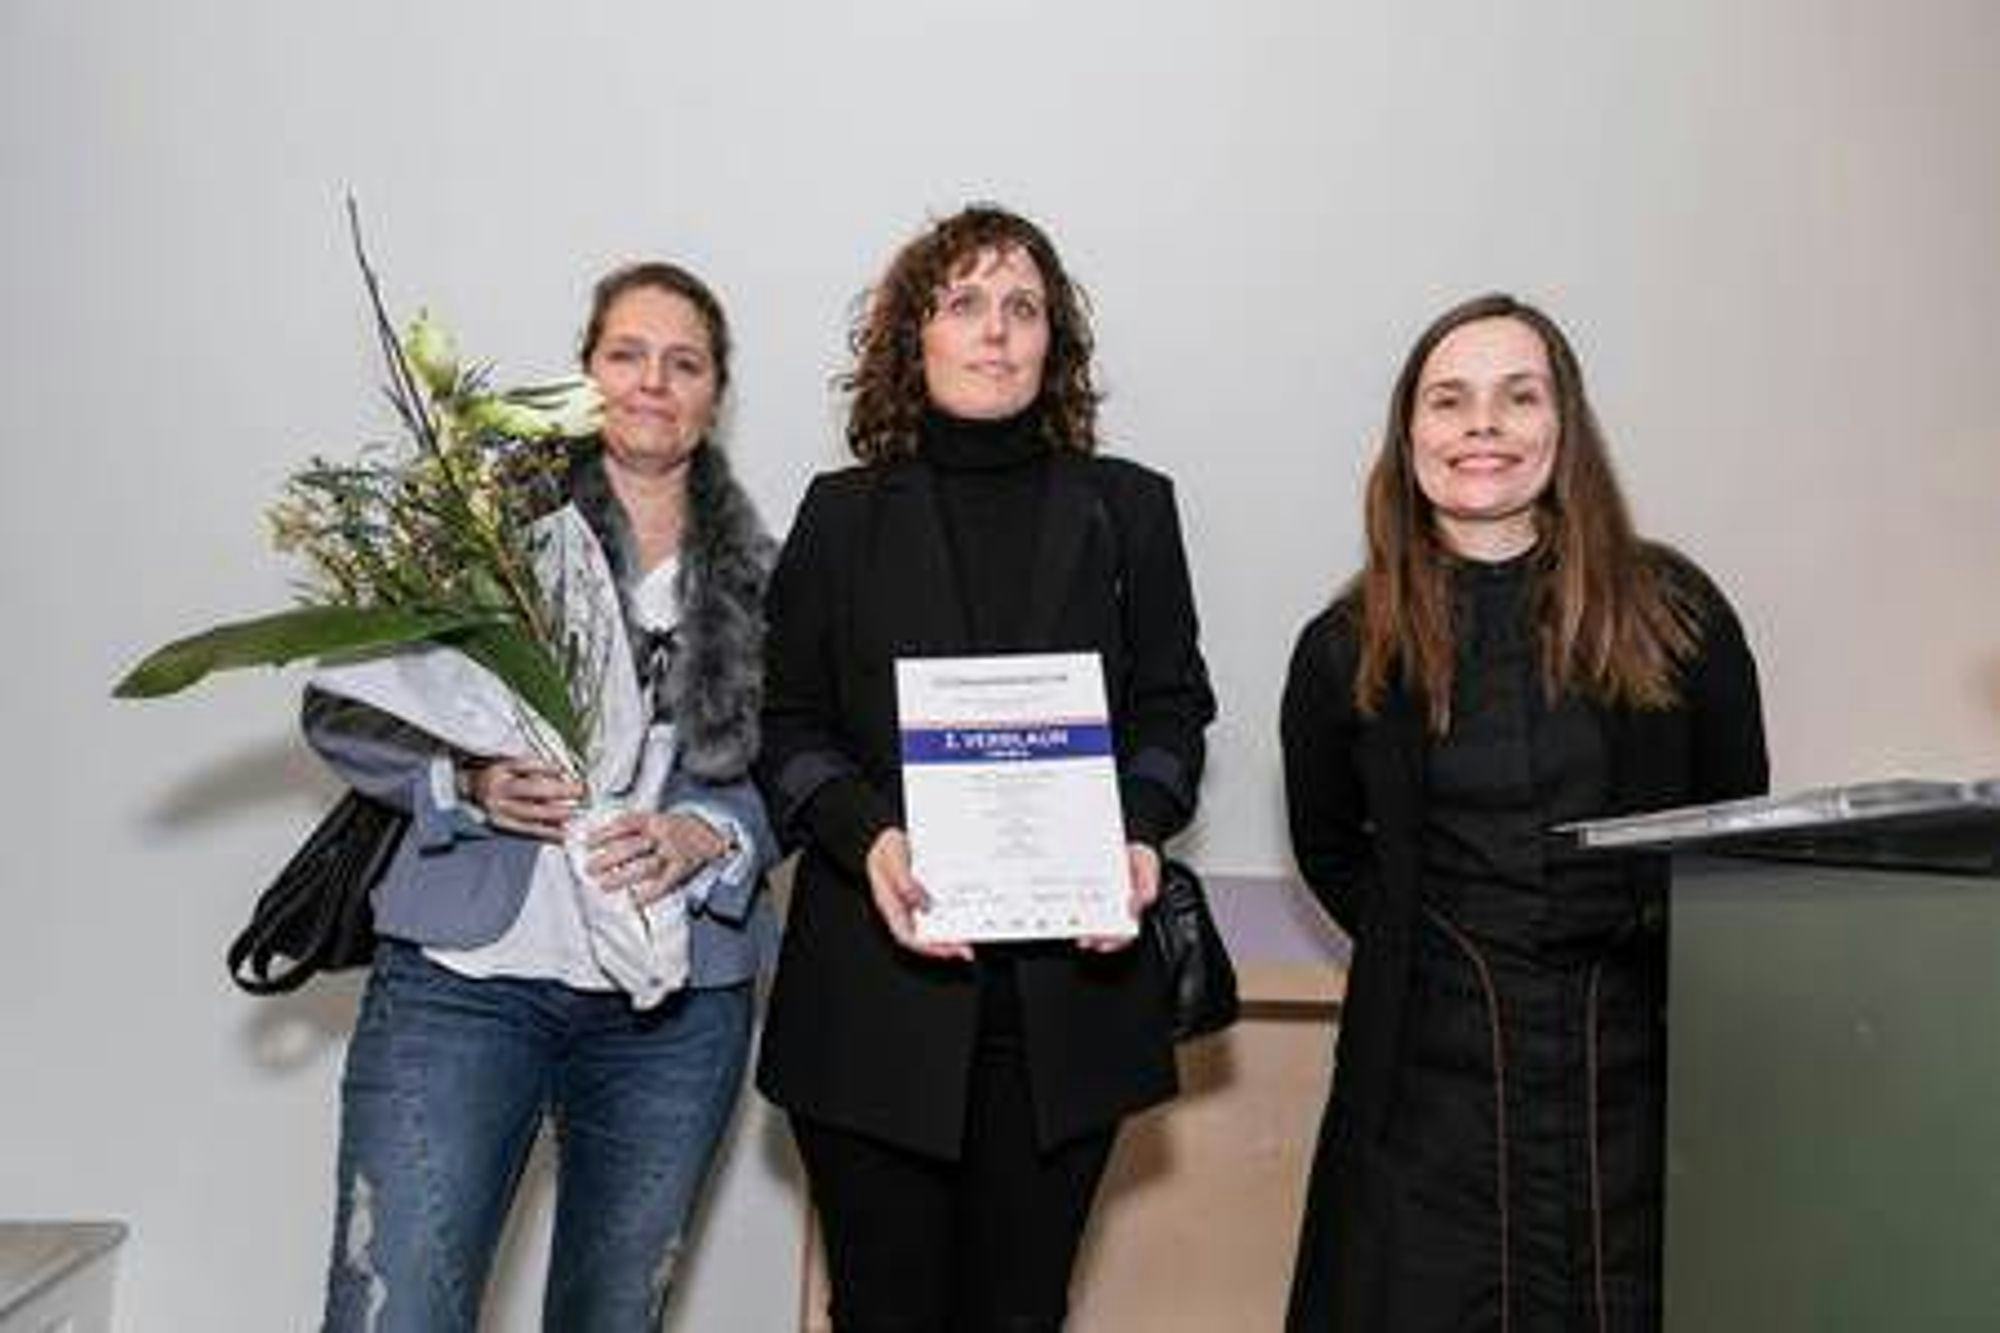 Three women holding flower bouquet and certificate